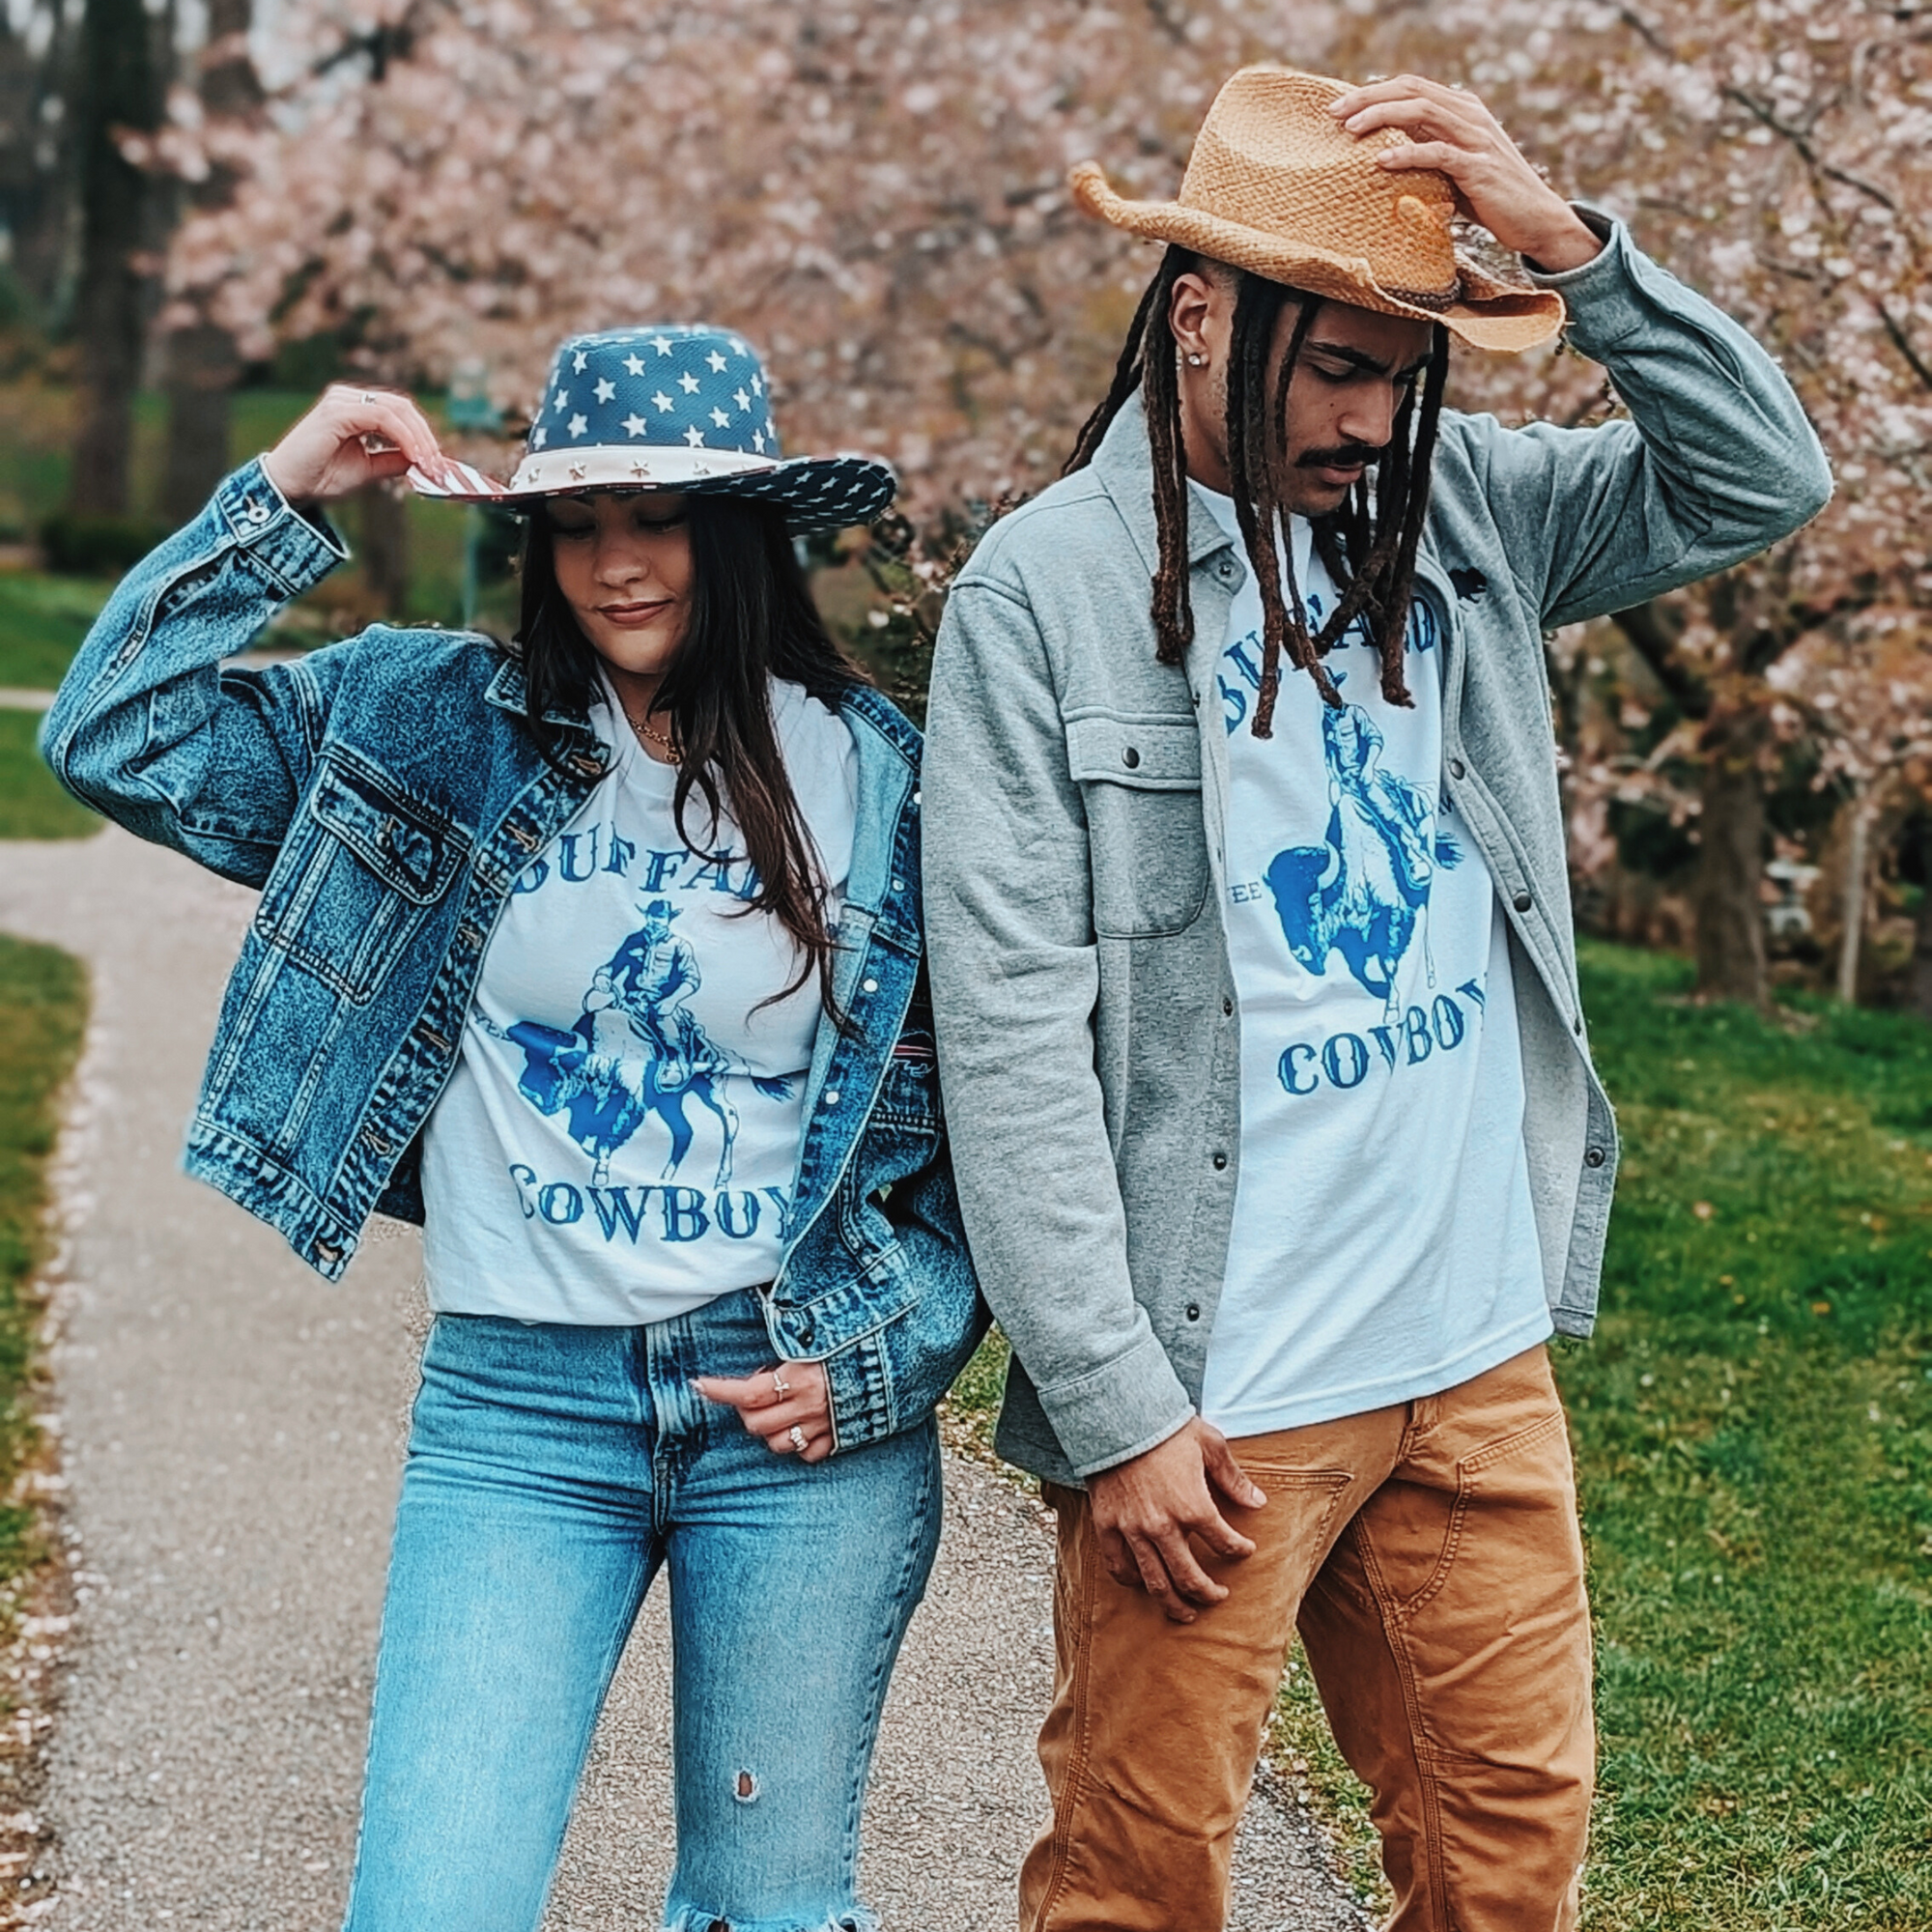 a guy and a girl posing for a picture while wearing cowboy hats and shirt that says buffalo cowboy with a cowboy riding a buffalo